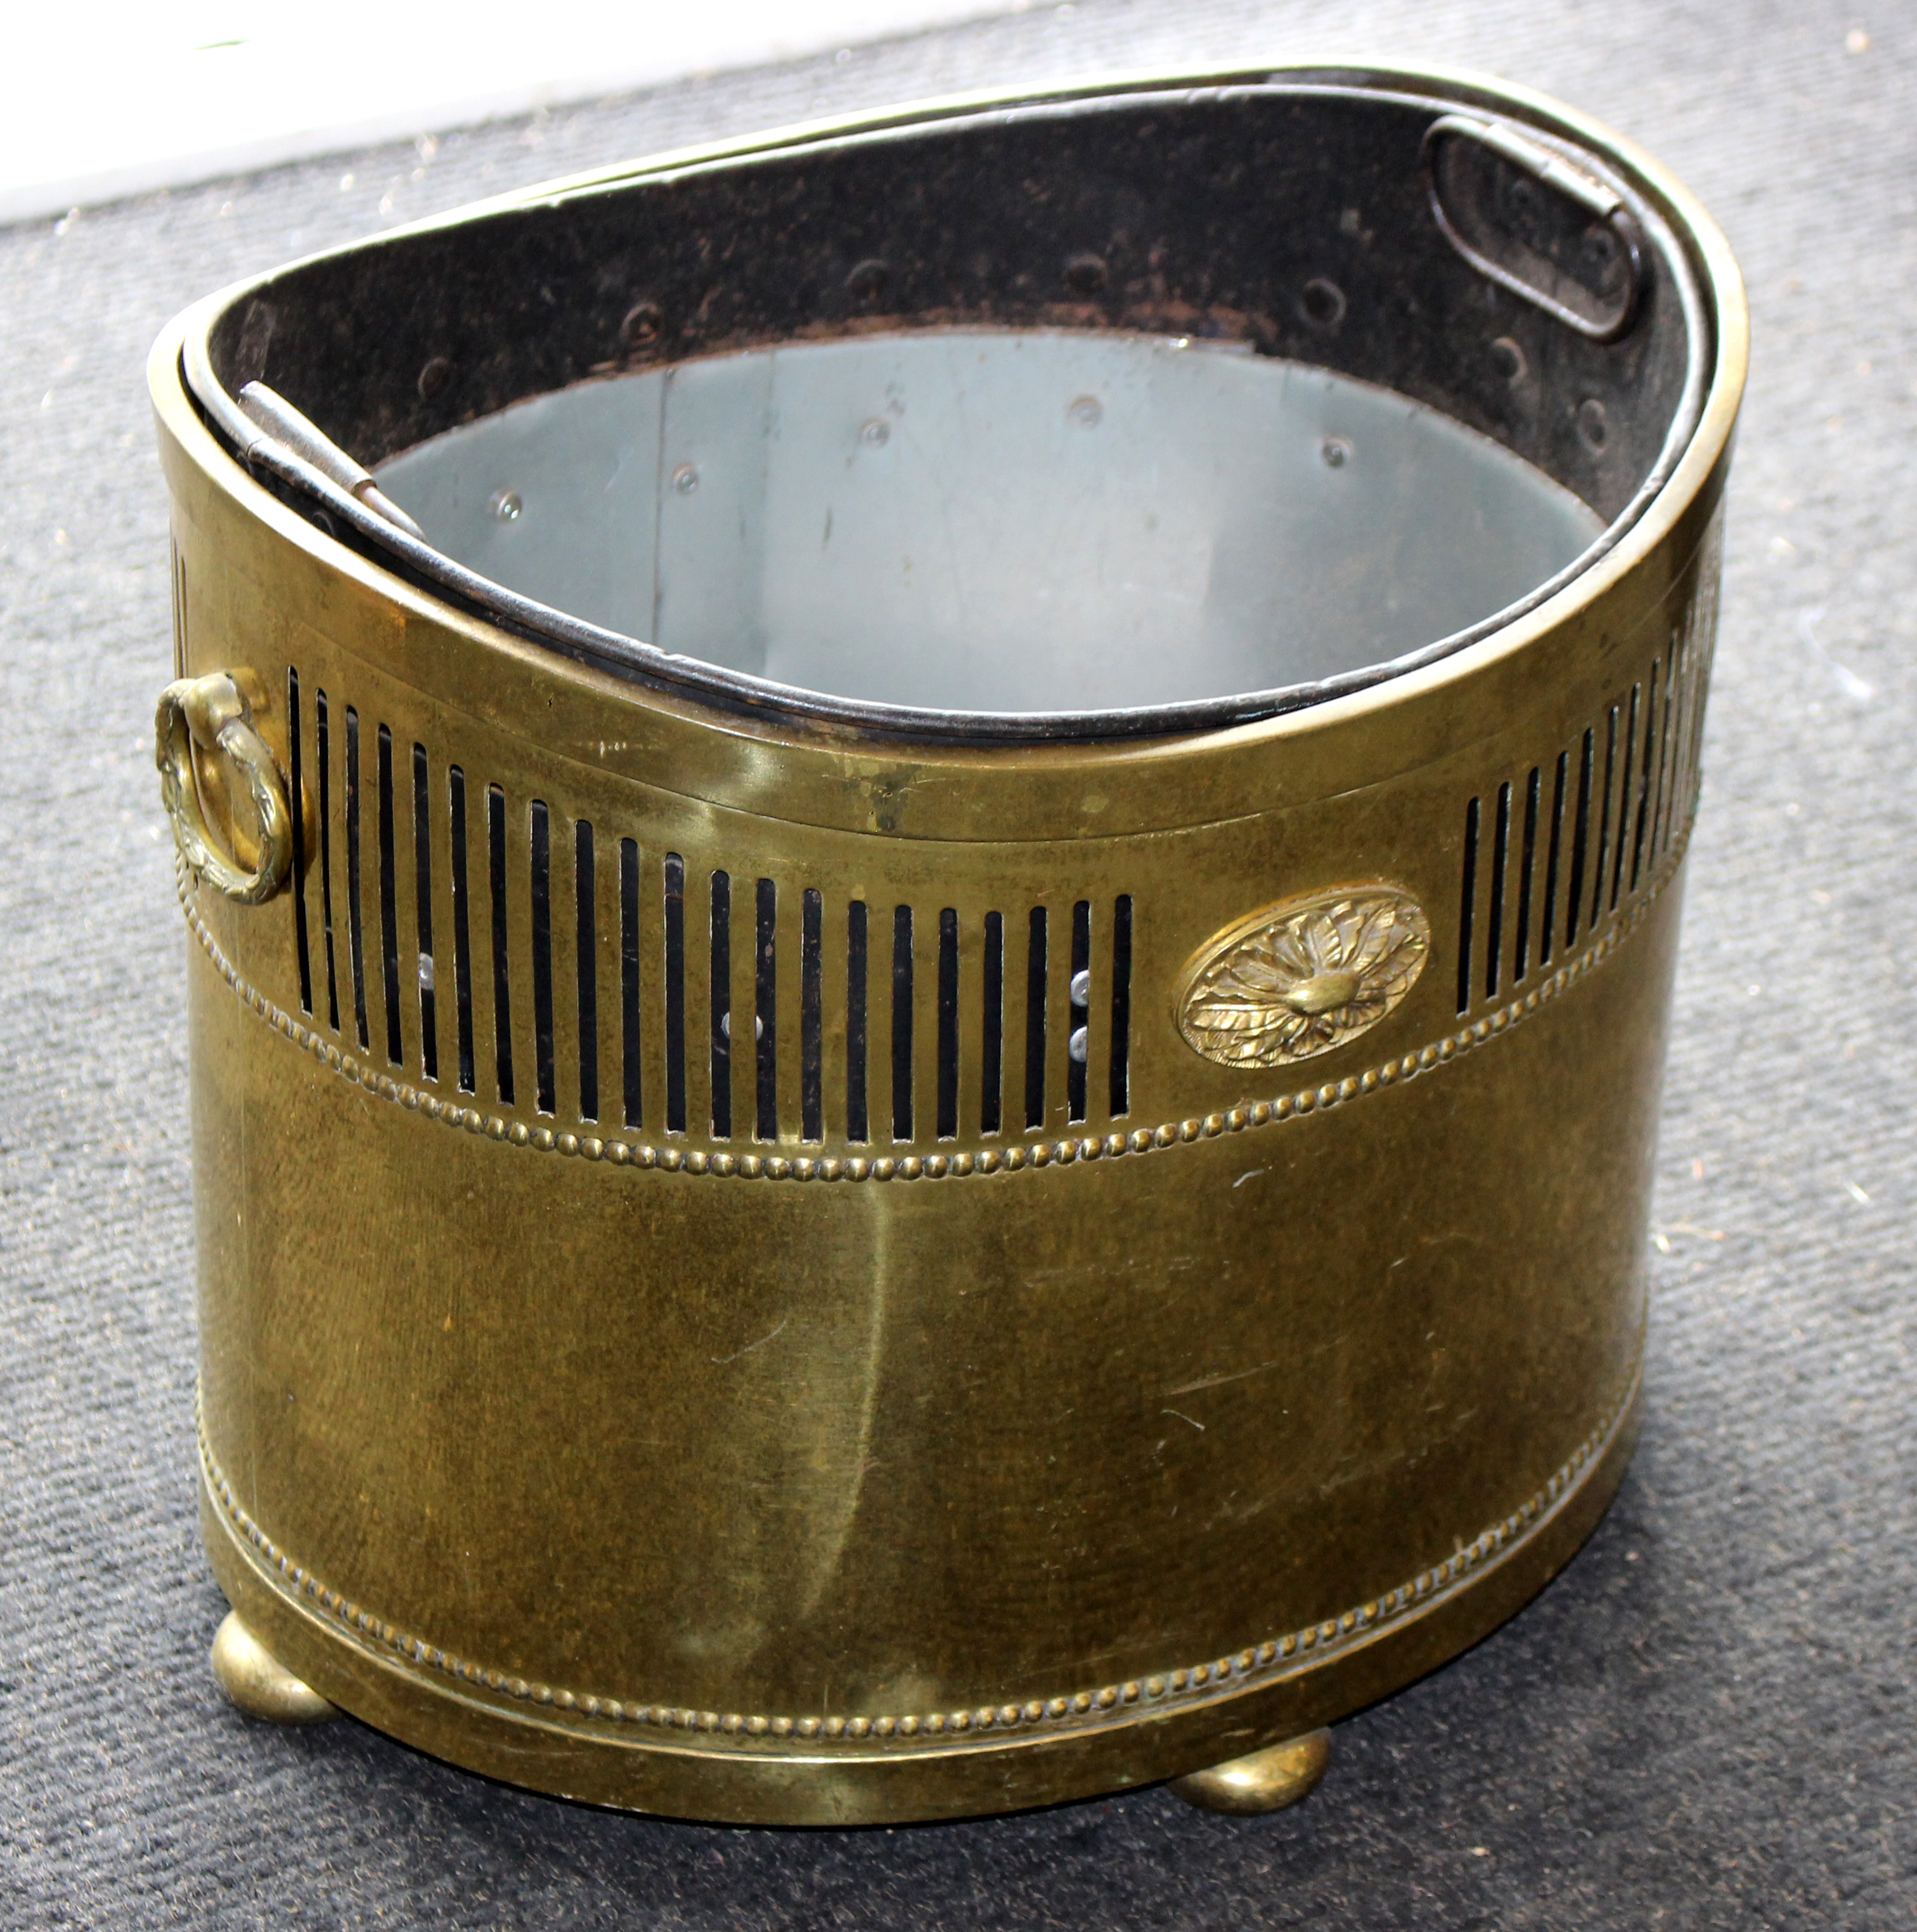 A brass coal scuttle of oval shape with pierced sides and ring handles